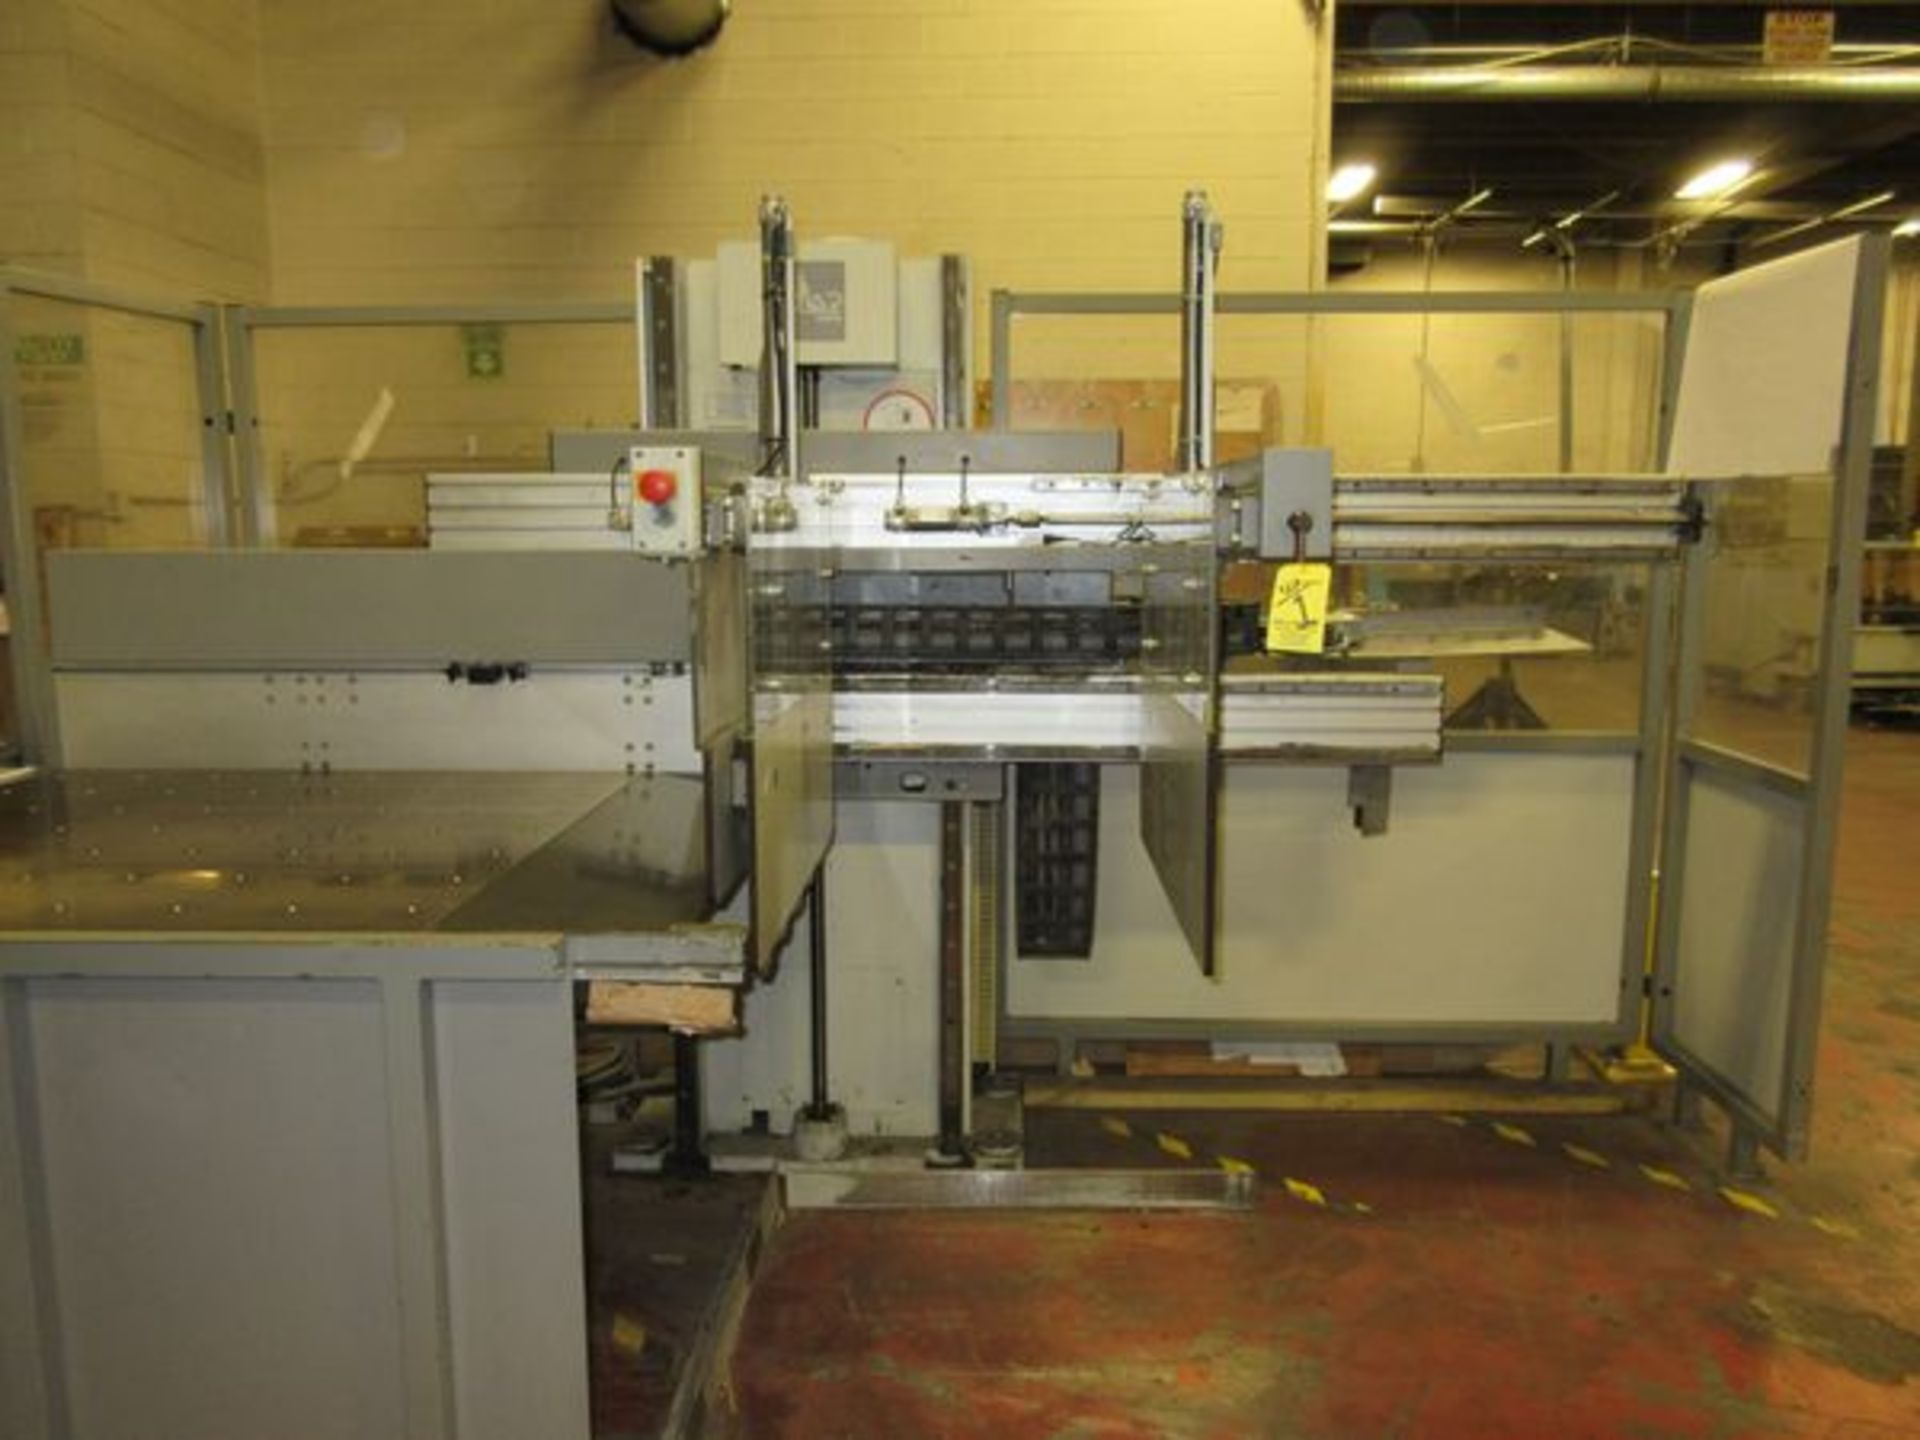 2007 Polar Model 115XT, 45" Paper Cutter, s/n 7731942, Air Table, Side Tables, Light, Curtain, - Image 4 of 5